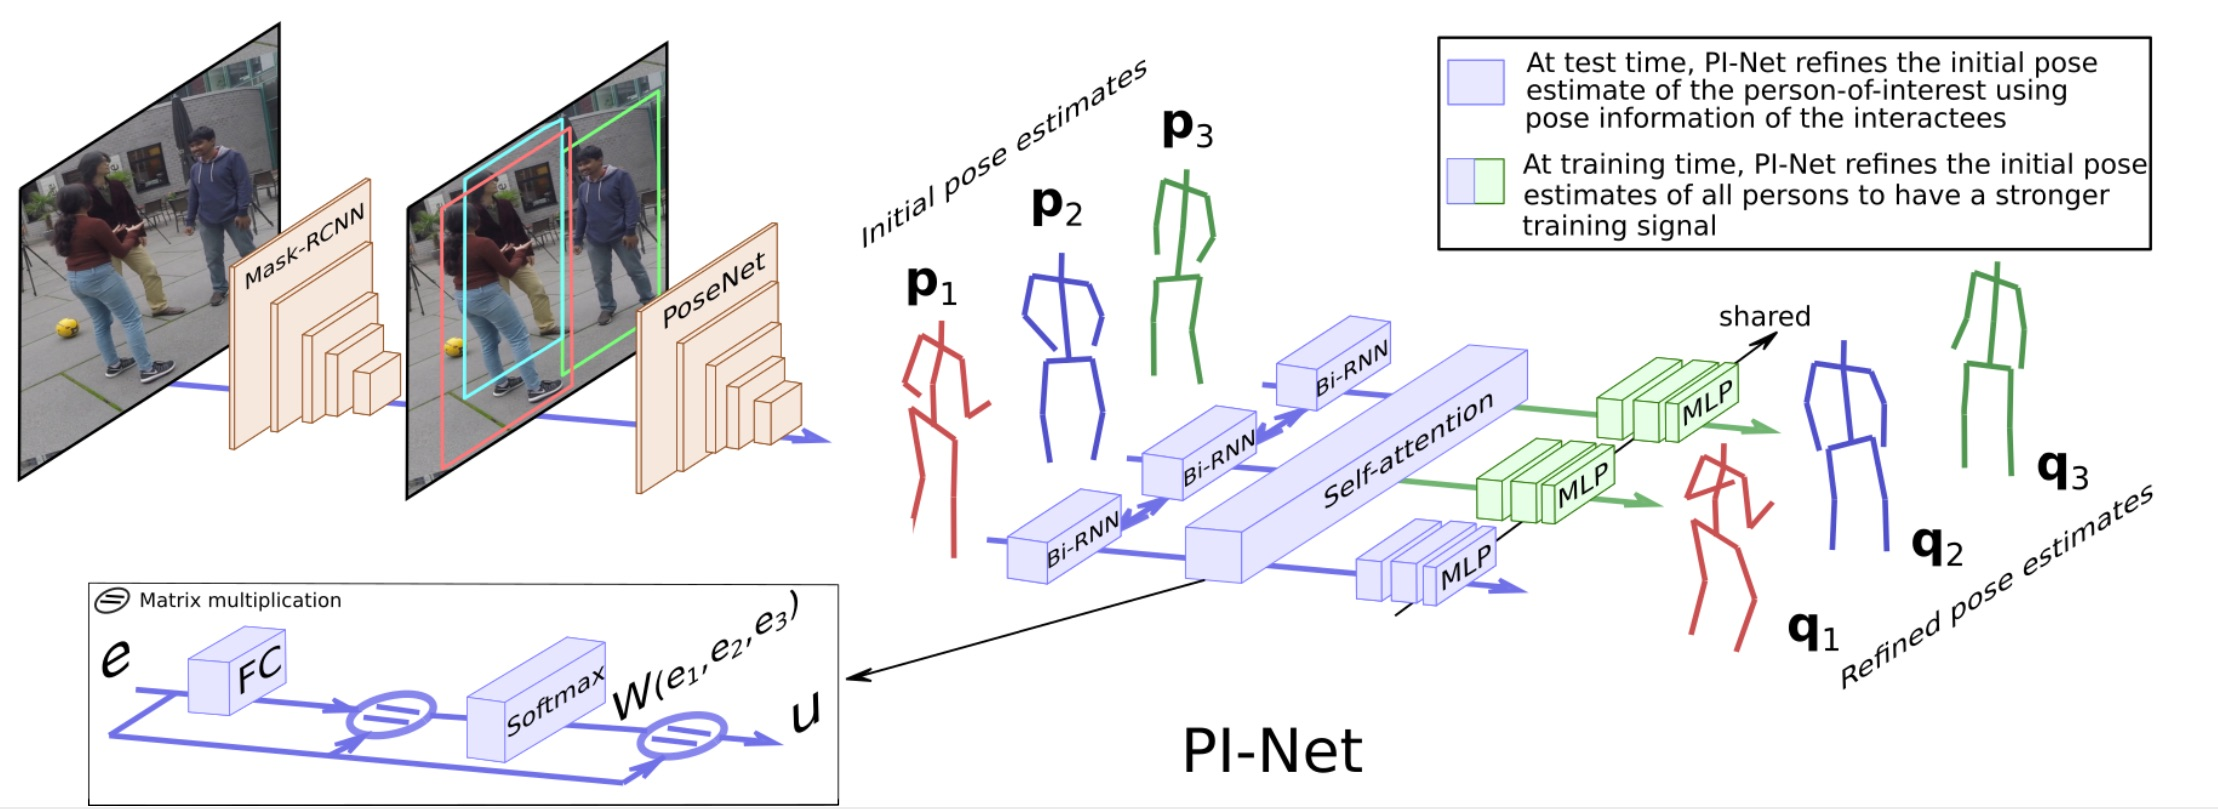 PI-Net Architecture. Mask-RCNN and PoseNet methods are used to extract the initial pose estimates. These estimates are fed into PI-Net, composed of three main blocks: Bi-RNN, Self-attention and the shared fully-connected layers. The output of PI-Net refines the initial pose estimates by exploiting the pose of the interacting persons.